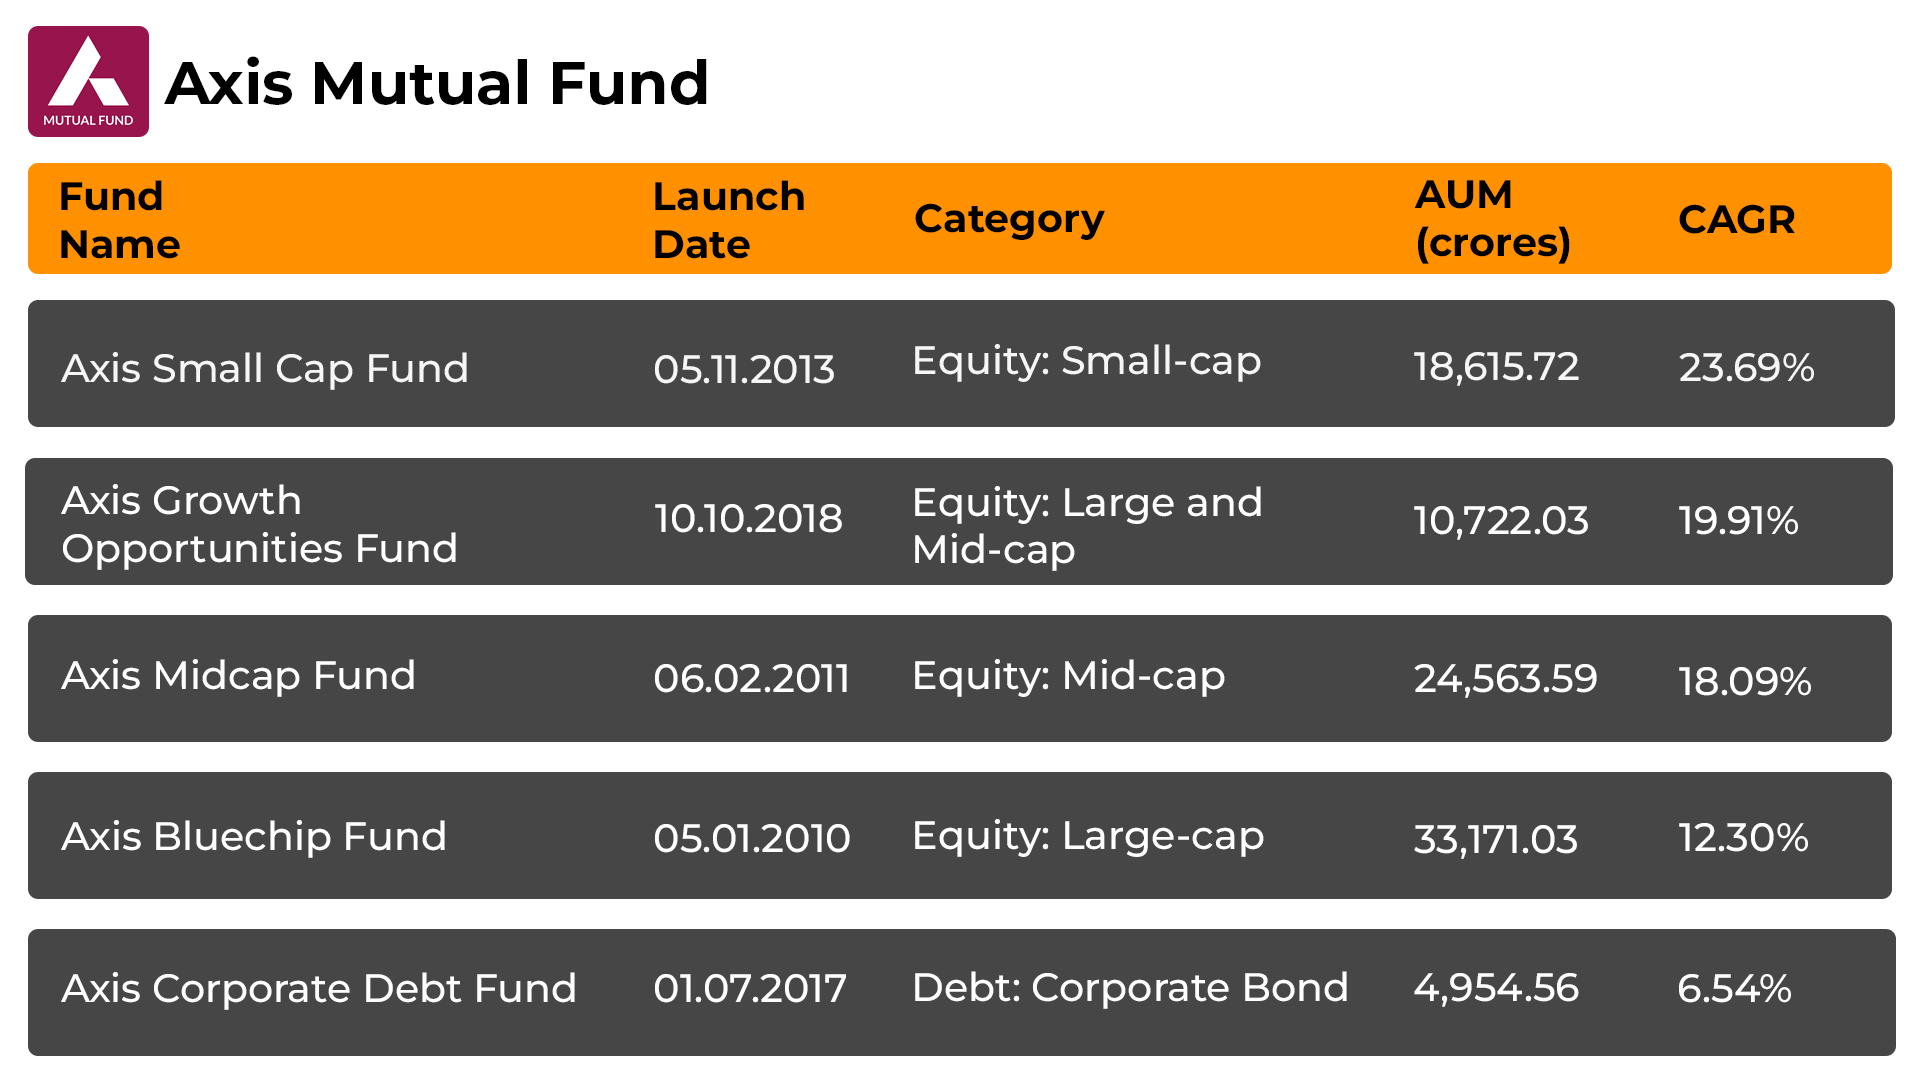 Top 5 Axis Mutual Fund